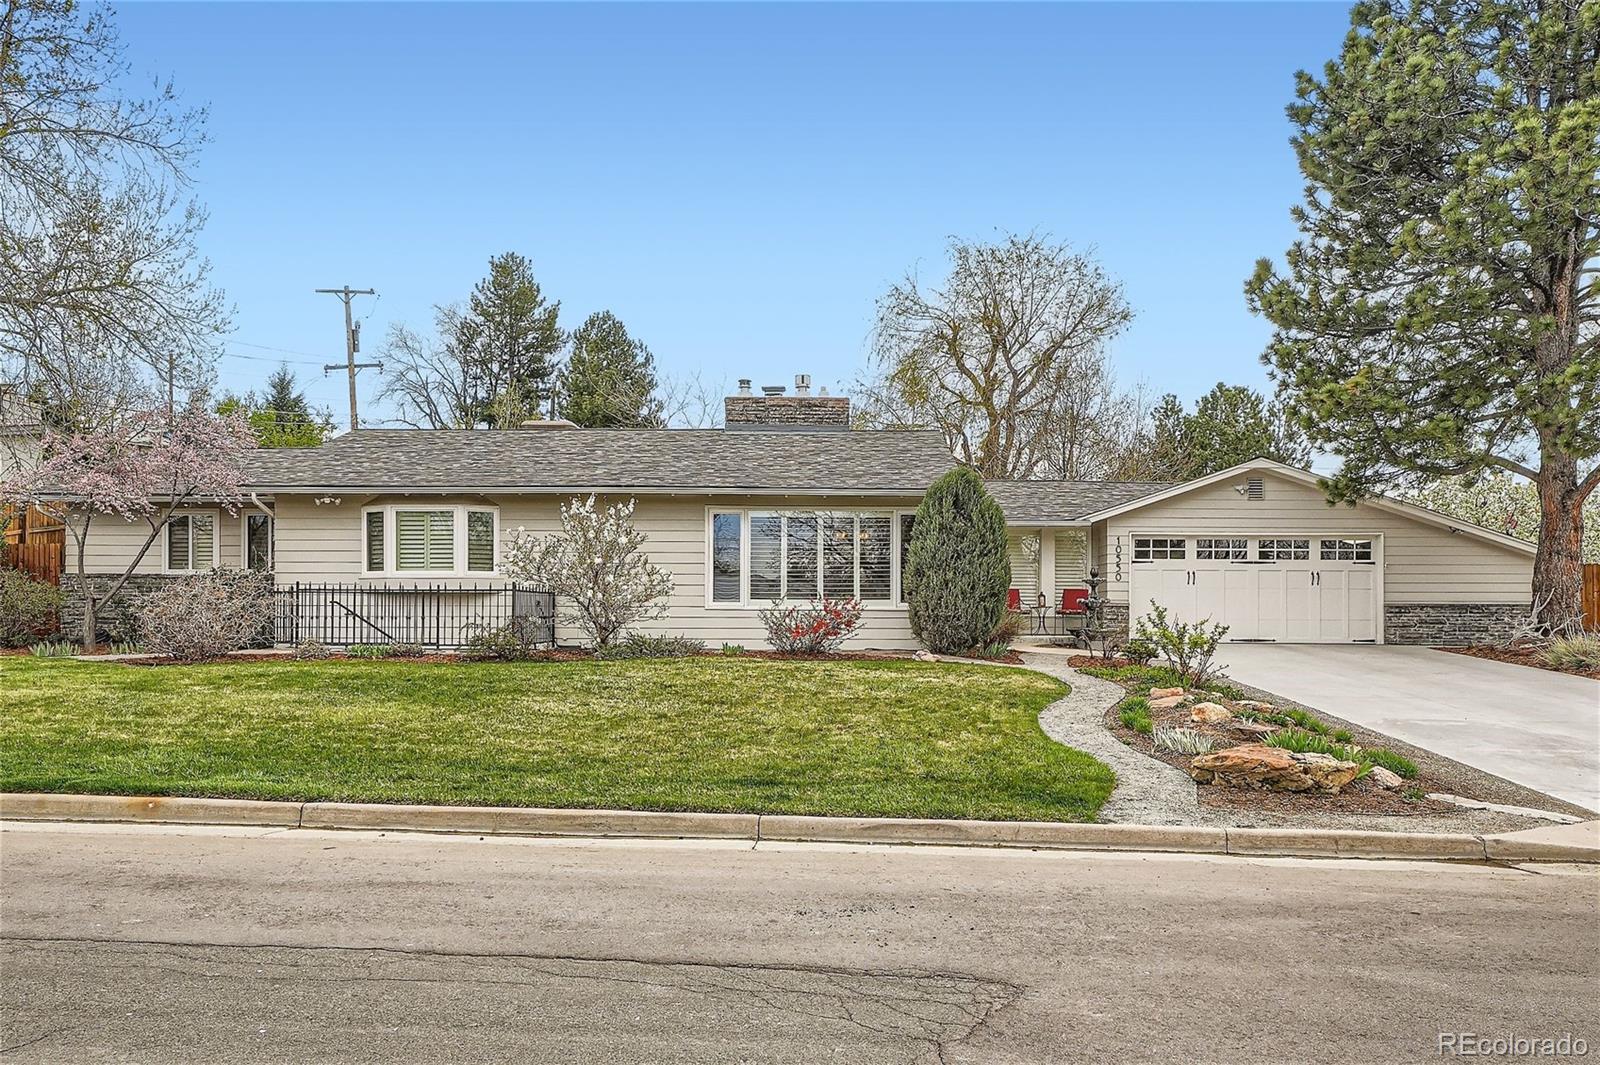 Report Image for 10550 W 32nd Place,Wheat Ridge, Colorado